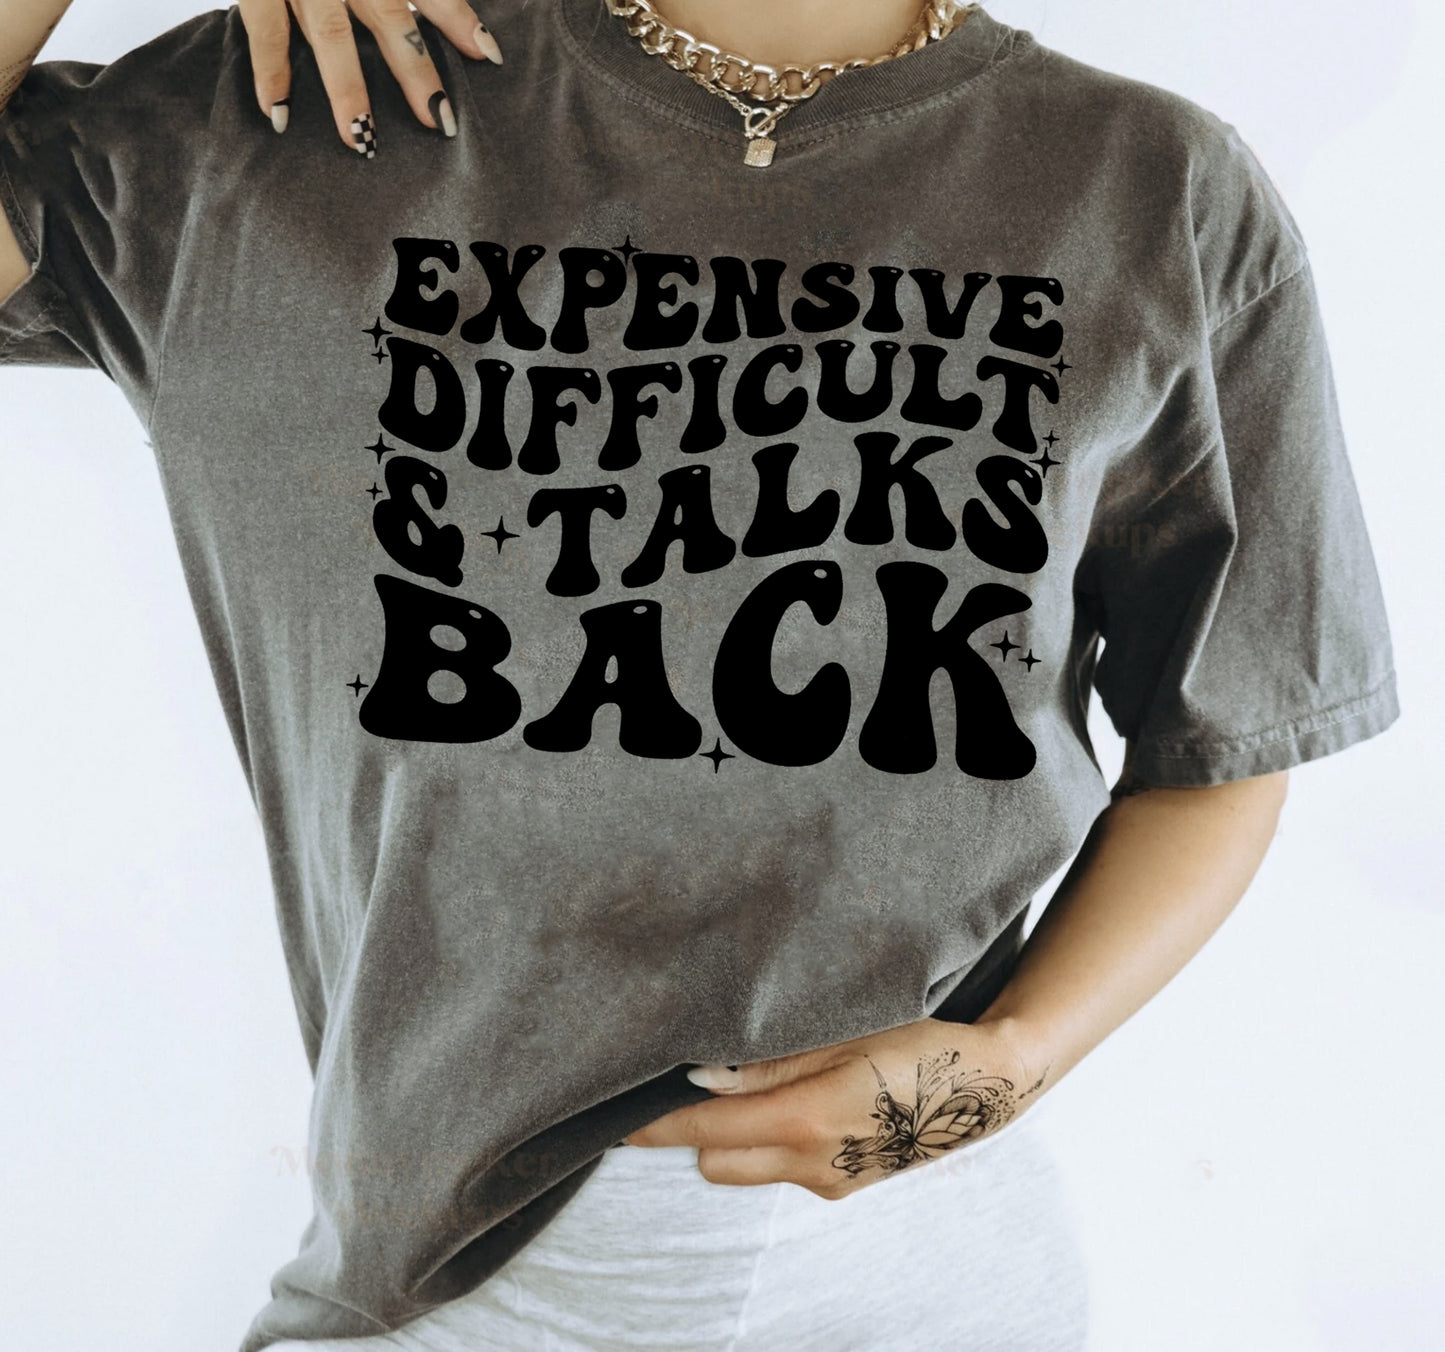 Expensive Difficult and Talks Back